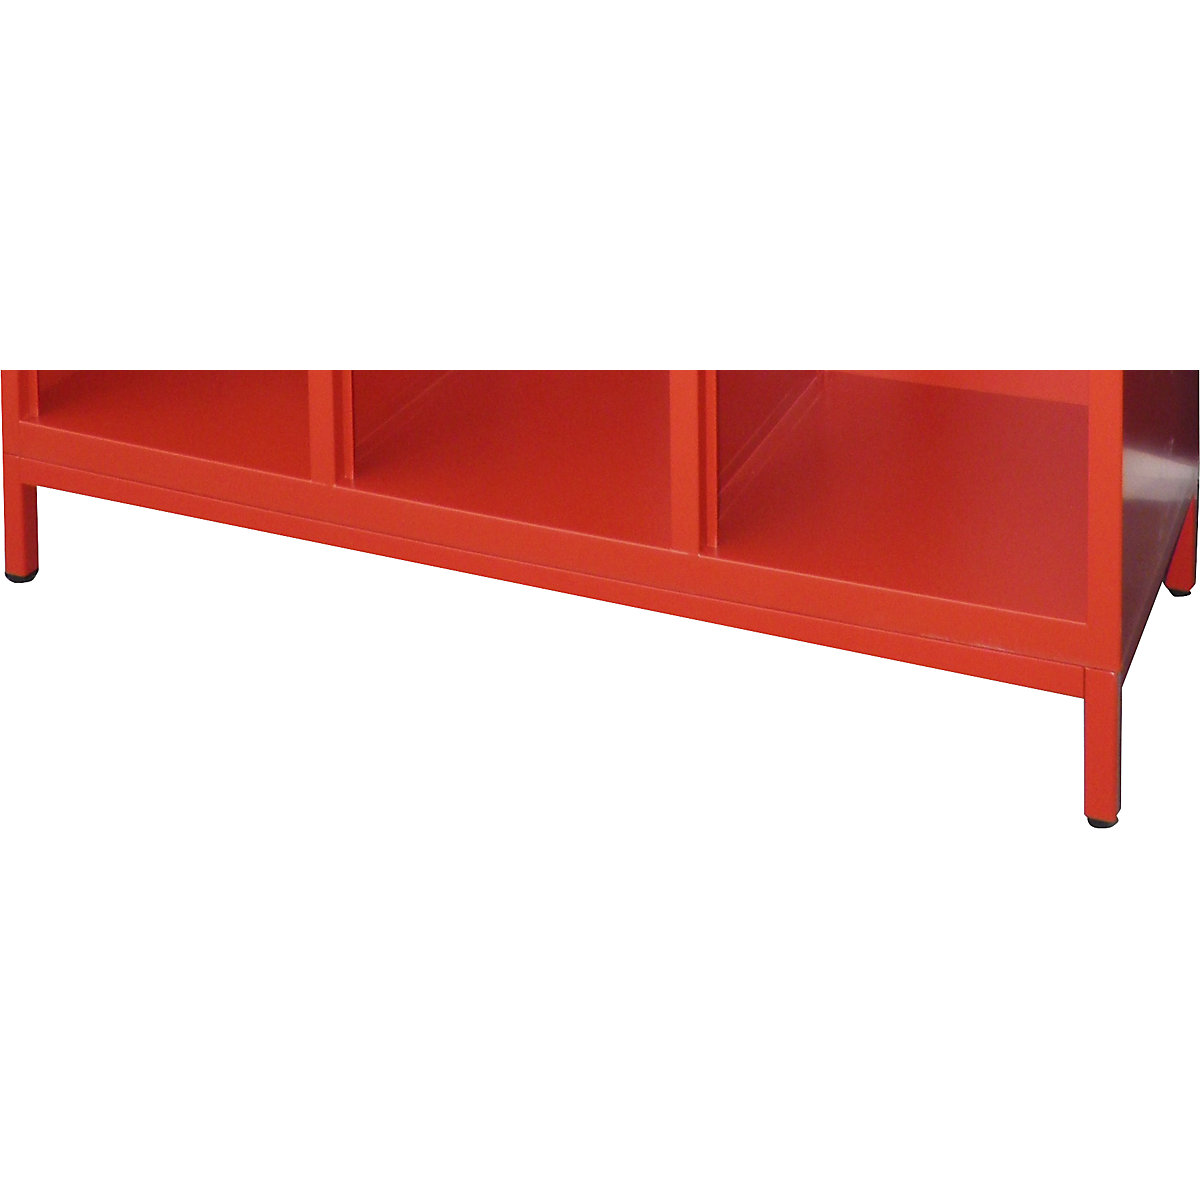 Base frame for fire brigade cupboard – Pavoy